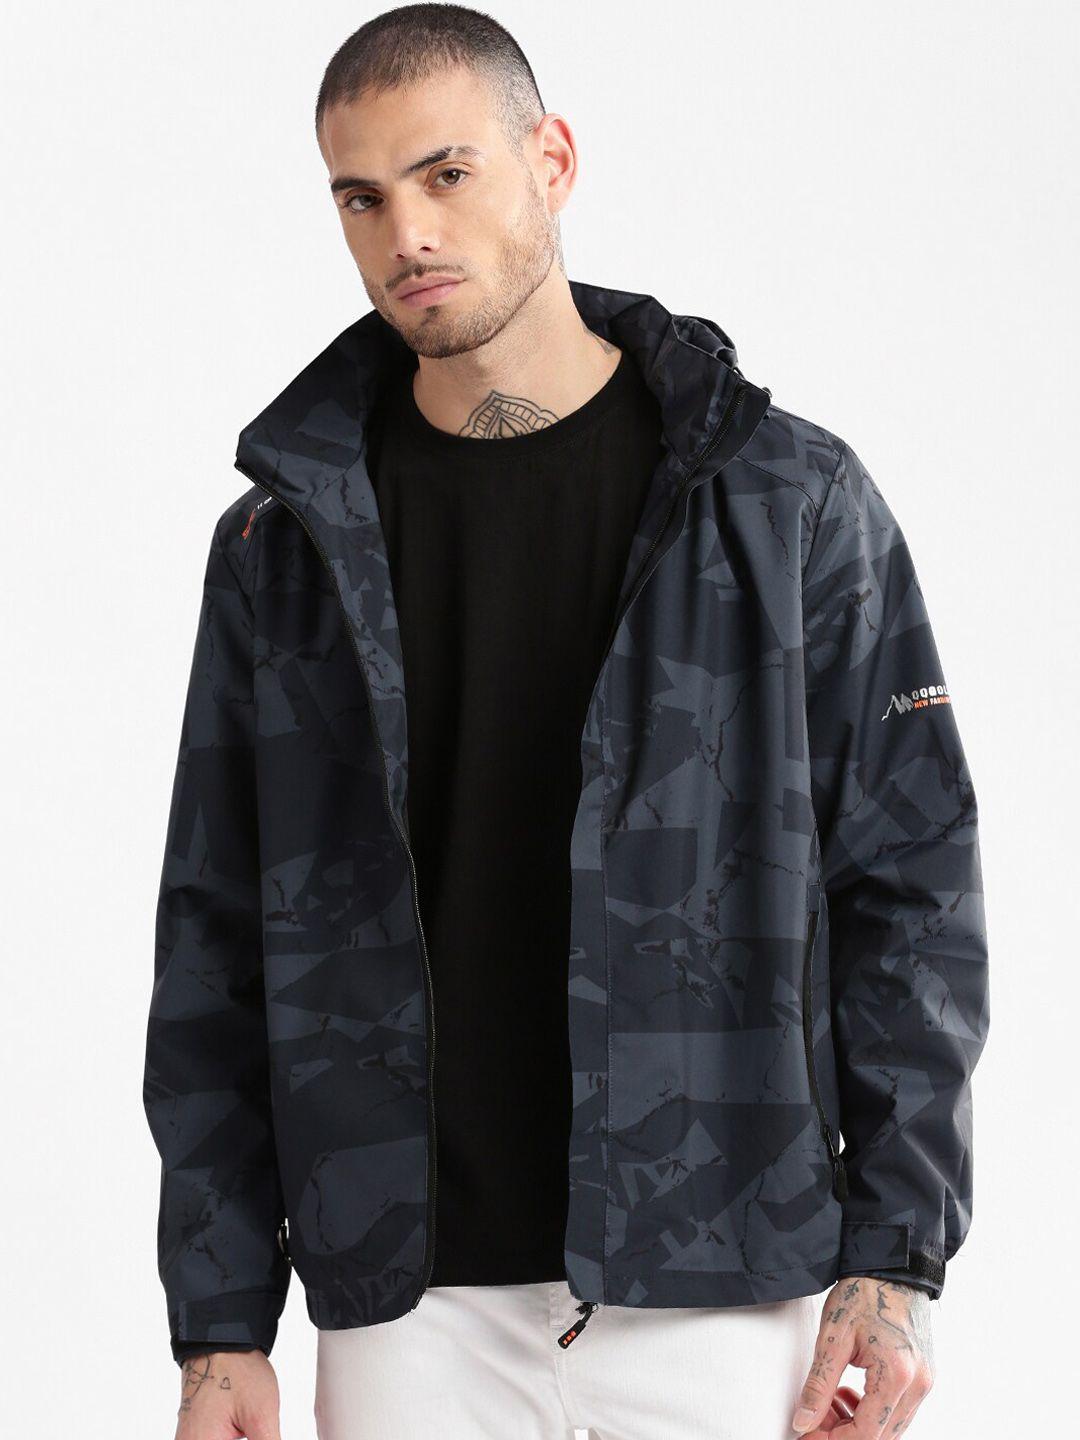 showoff abstract printed hooded windcheater tailored jacket